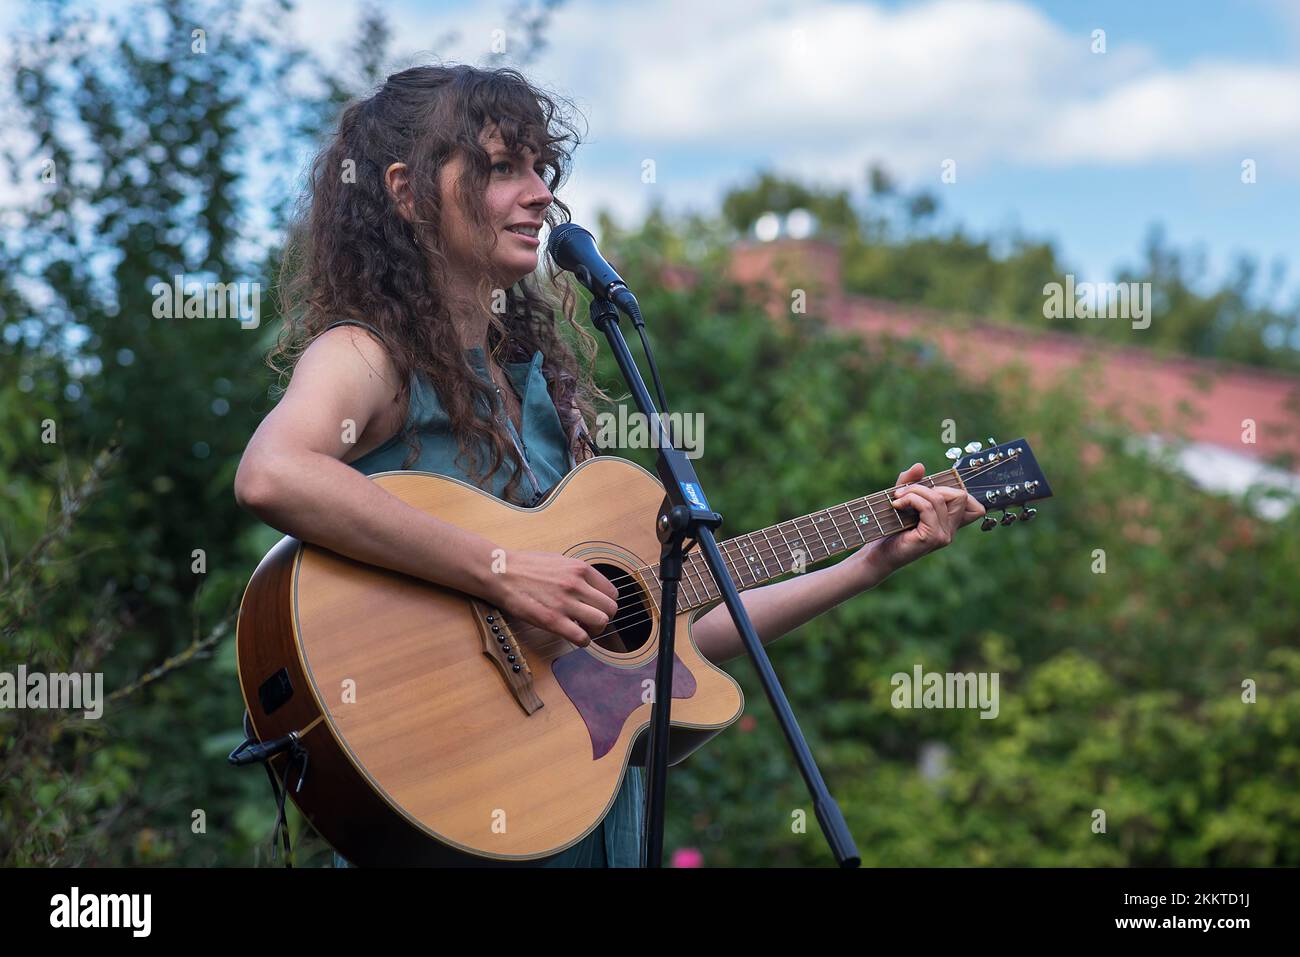 Young woman singing and playing the guitar, Lower Saxony, Germany, Europe Stock Photo